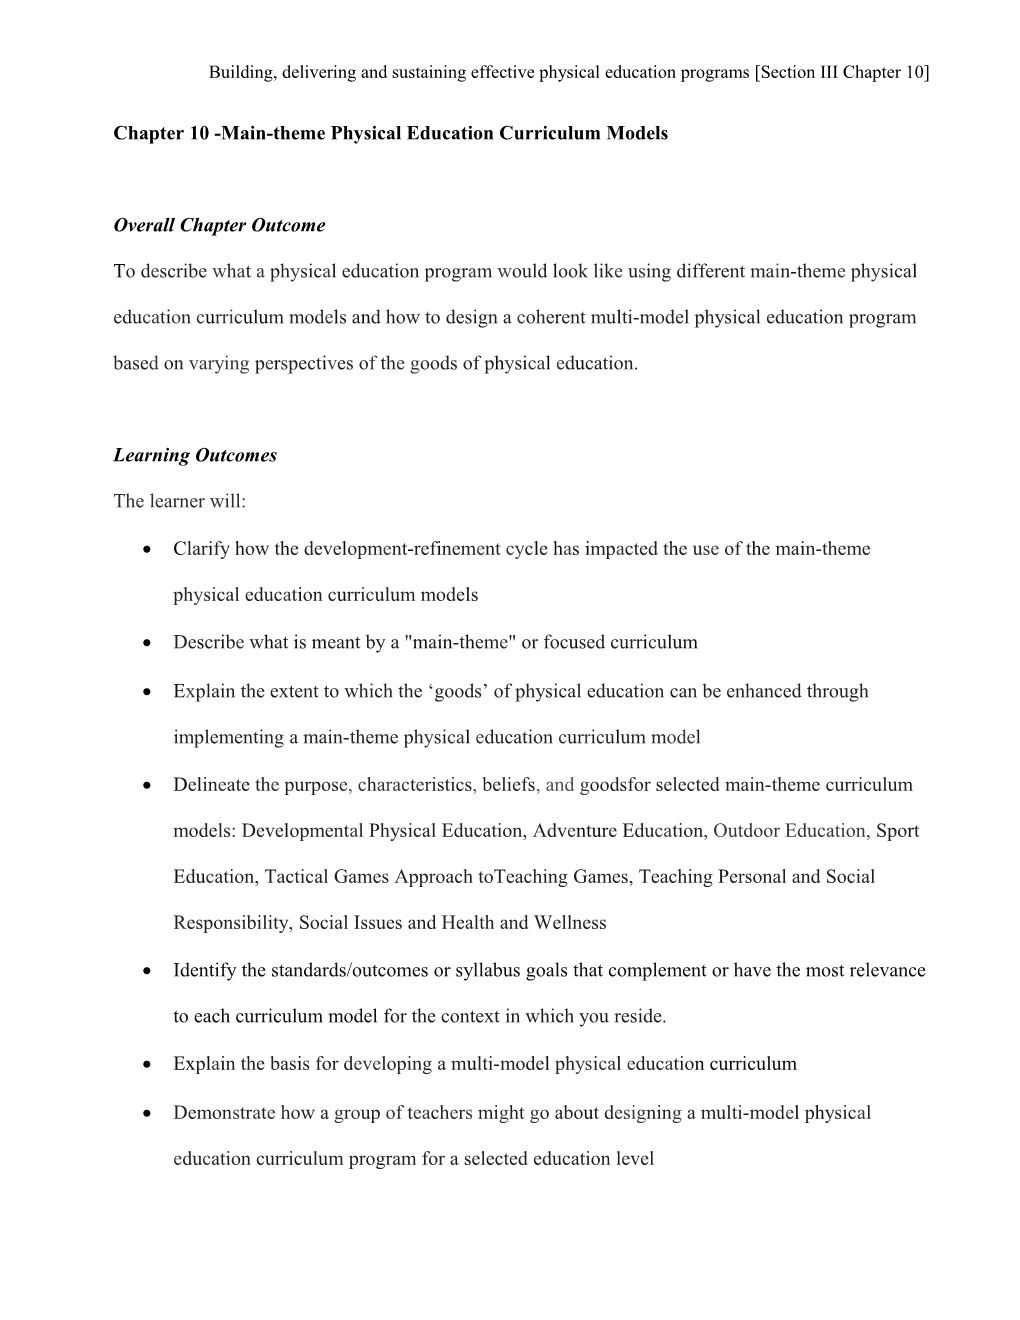 Chapter 10 -Main-Theme Physical Education Curriculum Models